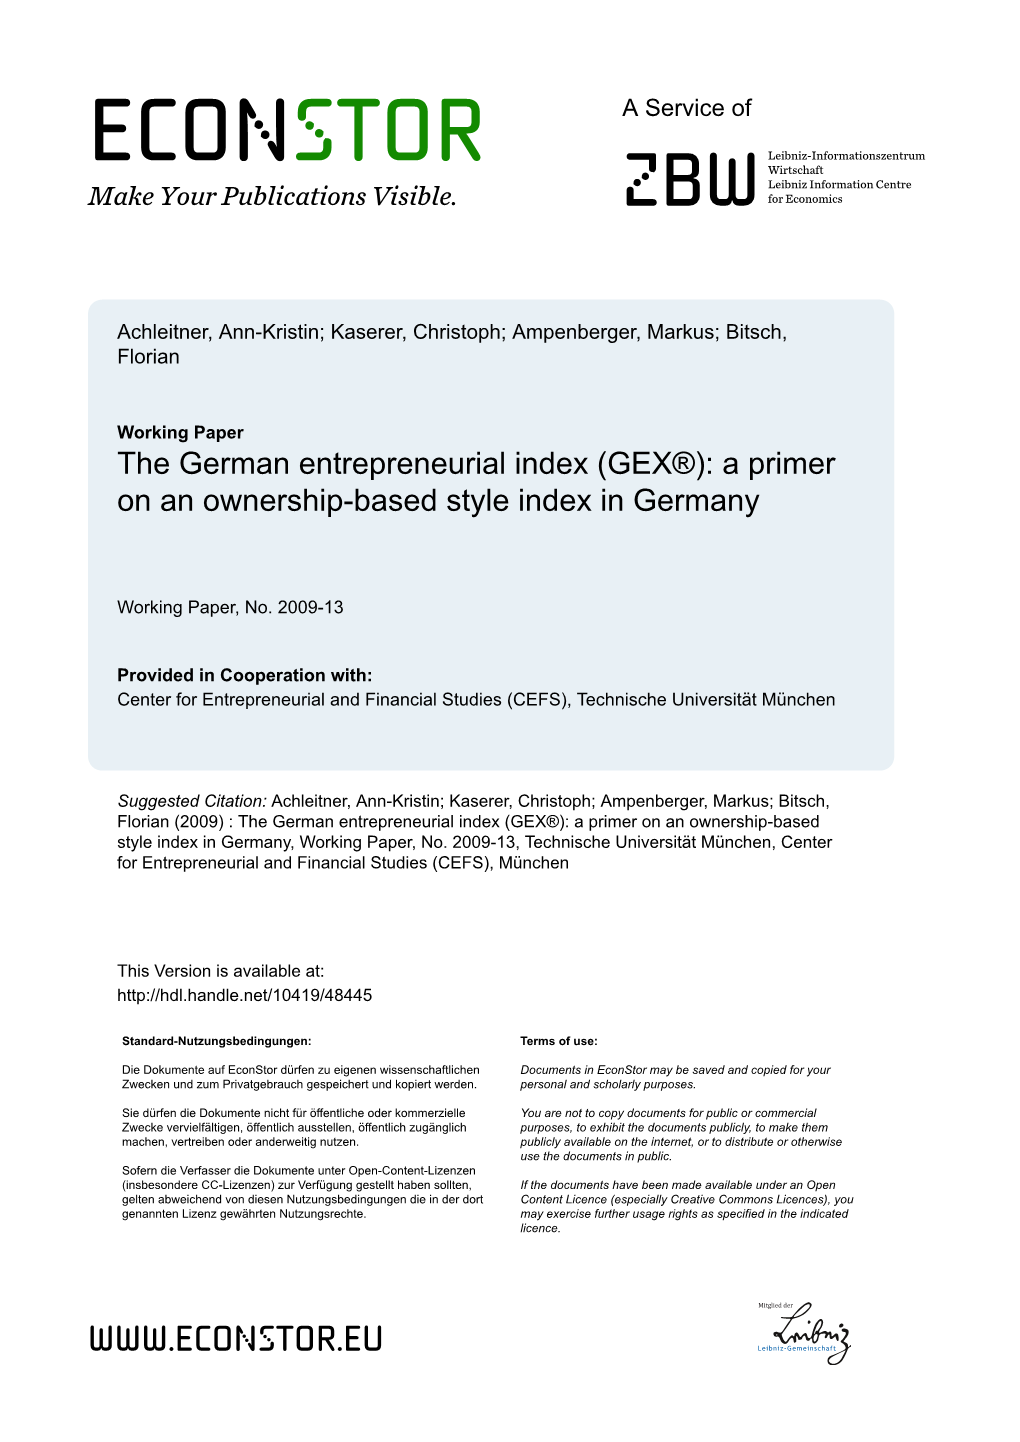 The German Entrepreneurial Index (GEX®): a Primer on an Ownership-Based Style Index in Germany